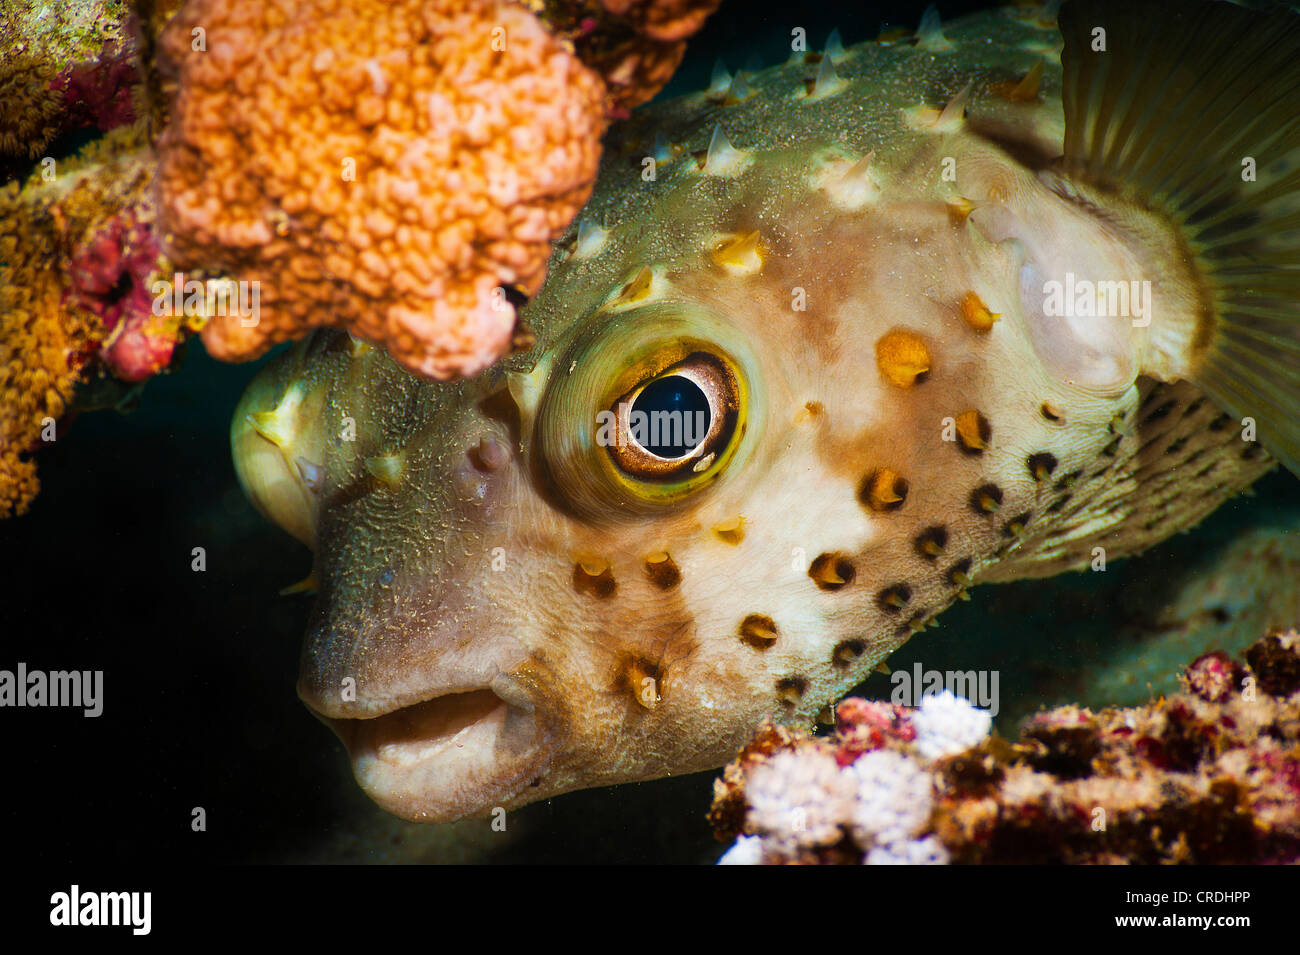 Puffer - Puffers (Tetraodontidae) - Tetraodontiformes - ray-finned fishes (Actinopterygii) - Fishes (Pisces) - fauna Stock Photo